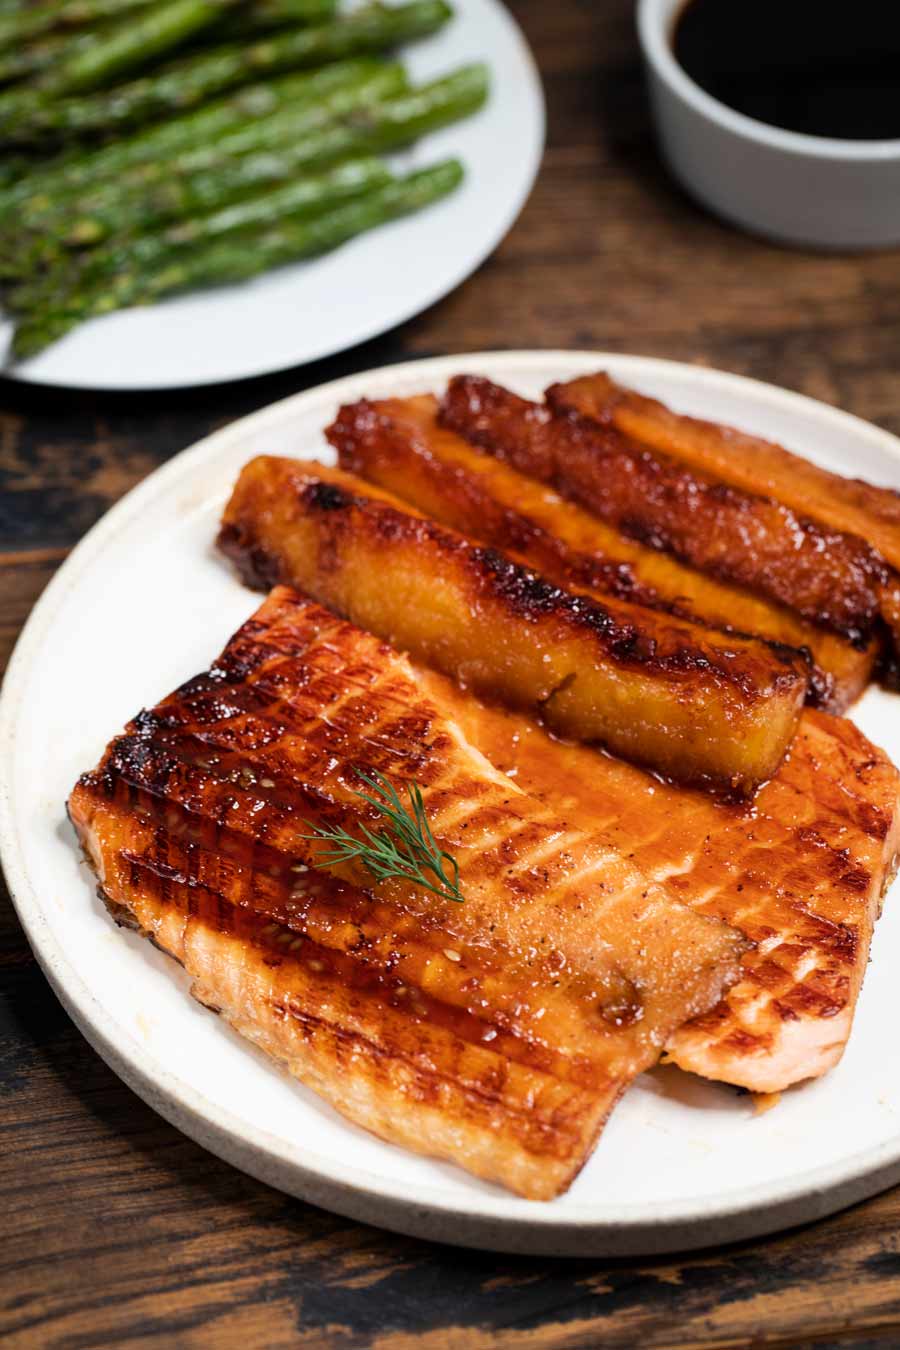 Grilled salmon and sugared grilled pineapple on a white plate with asparagus in the background.